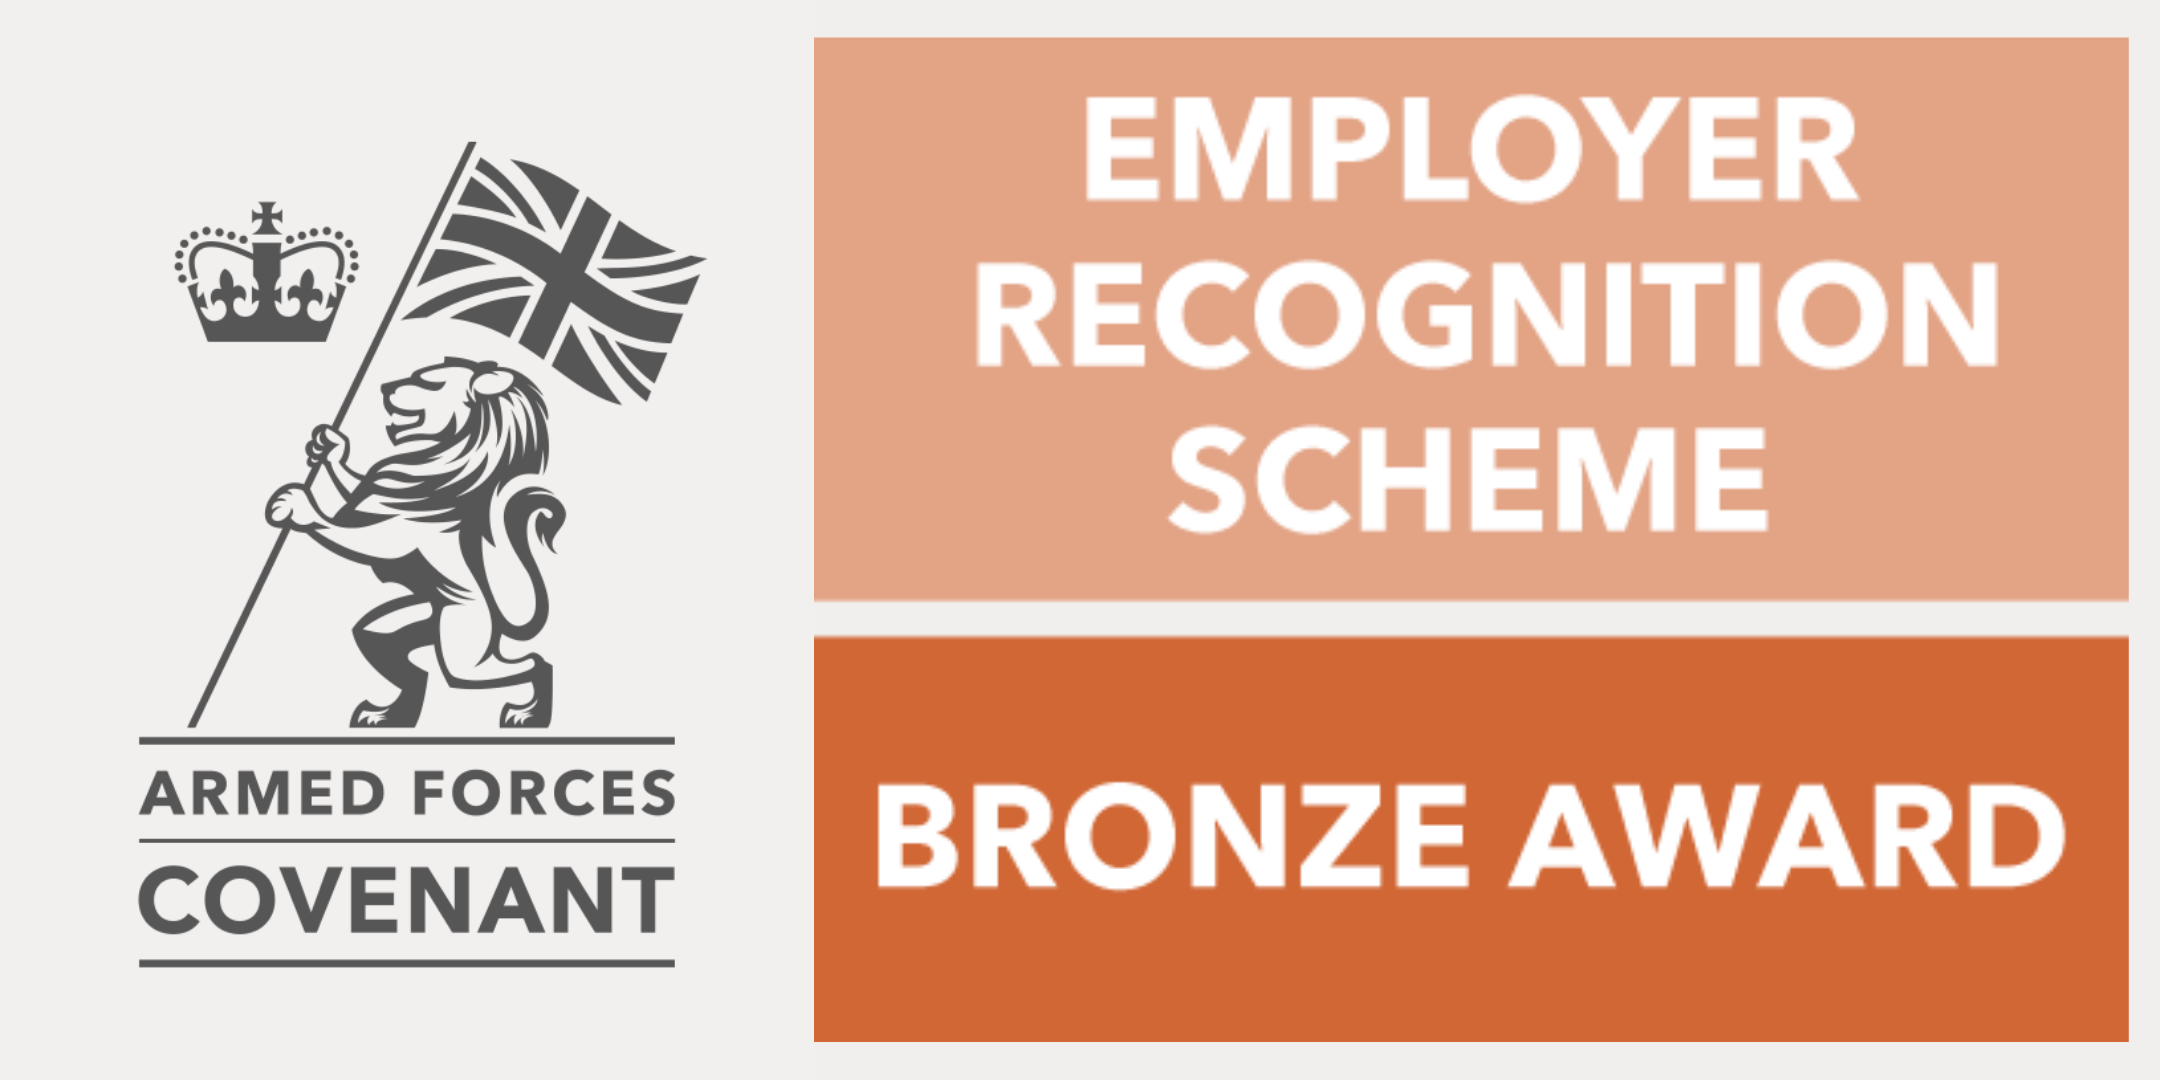 Image of the Employer Recognition Scheme Bronze Award